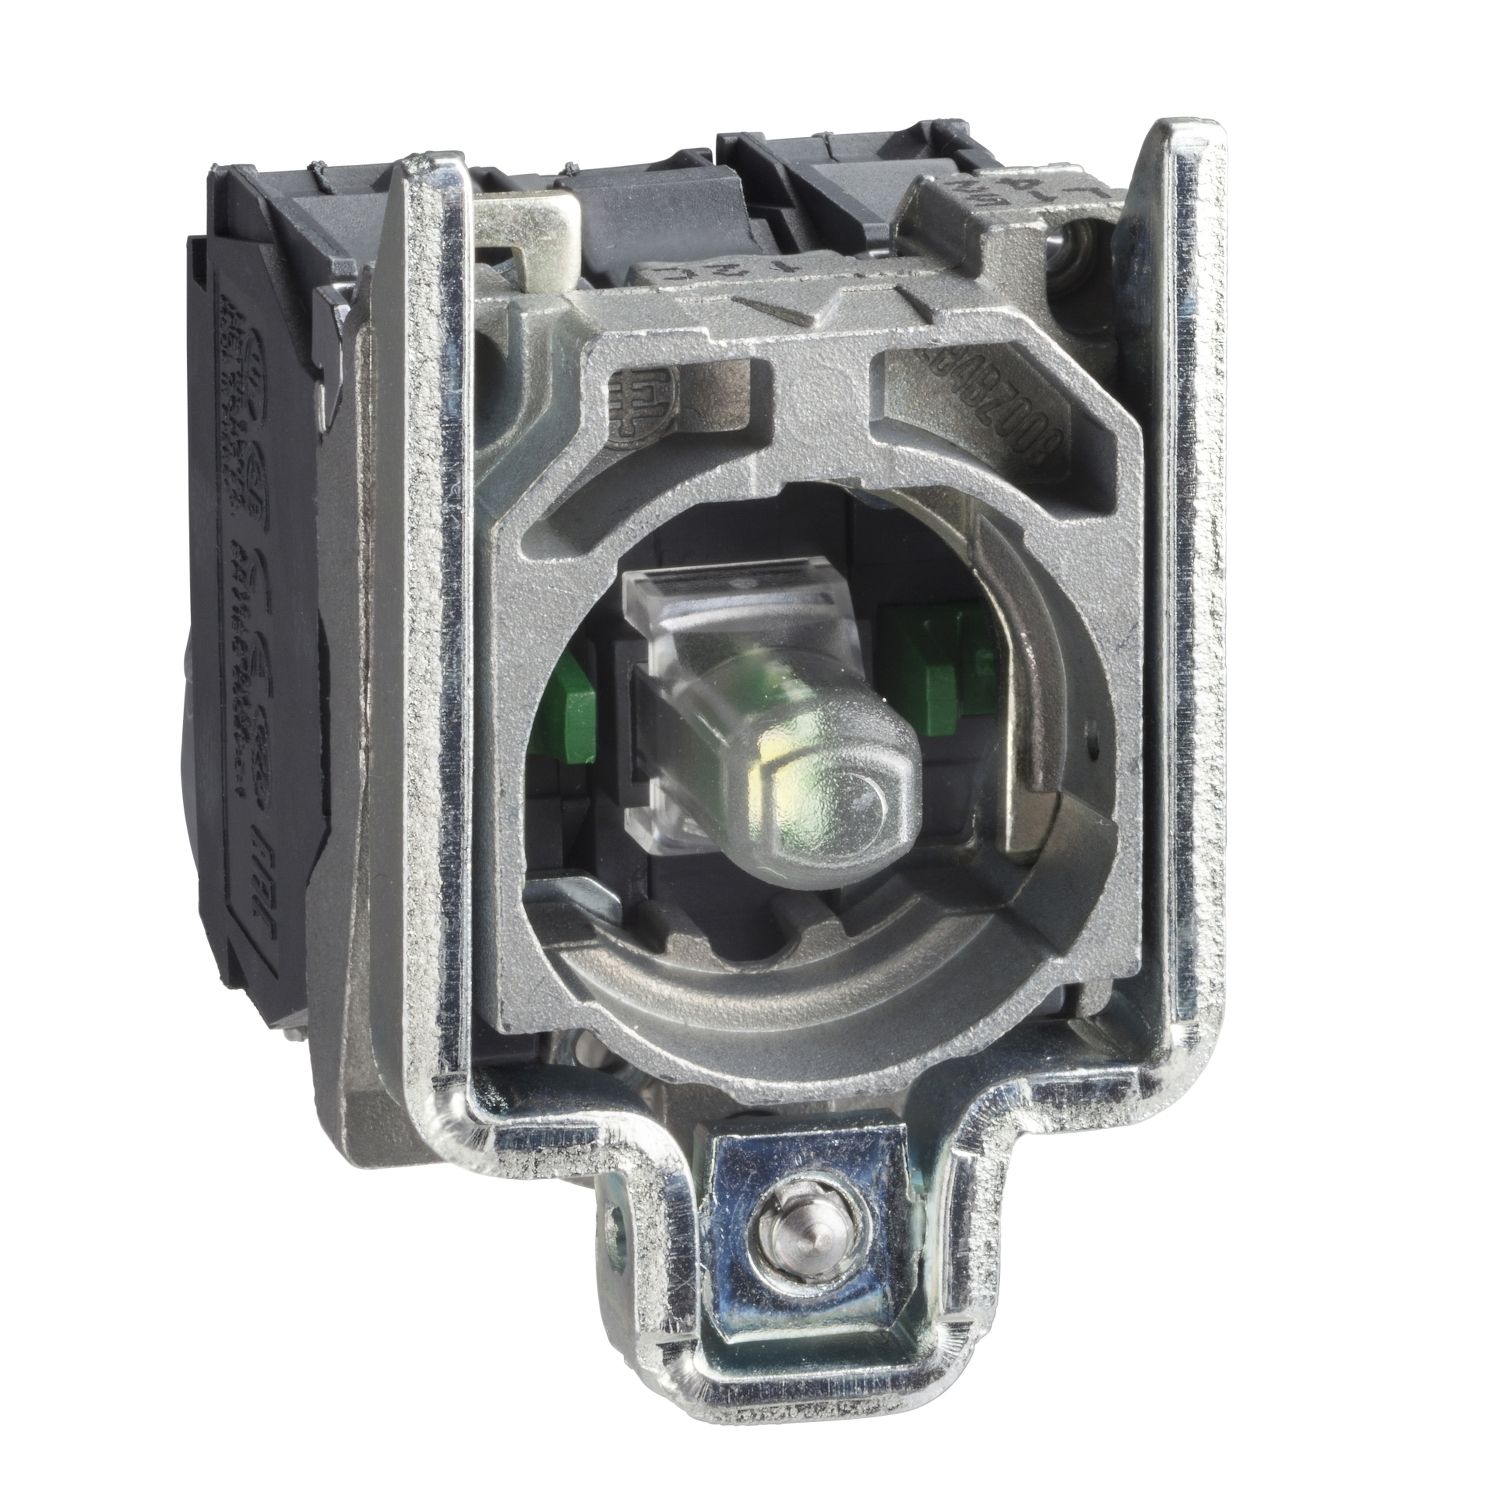 ZB4BW0M35 green light block with body/fixing collar with integral LED 230...240V 1NO+1NC